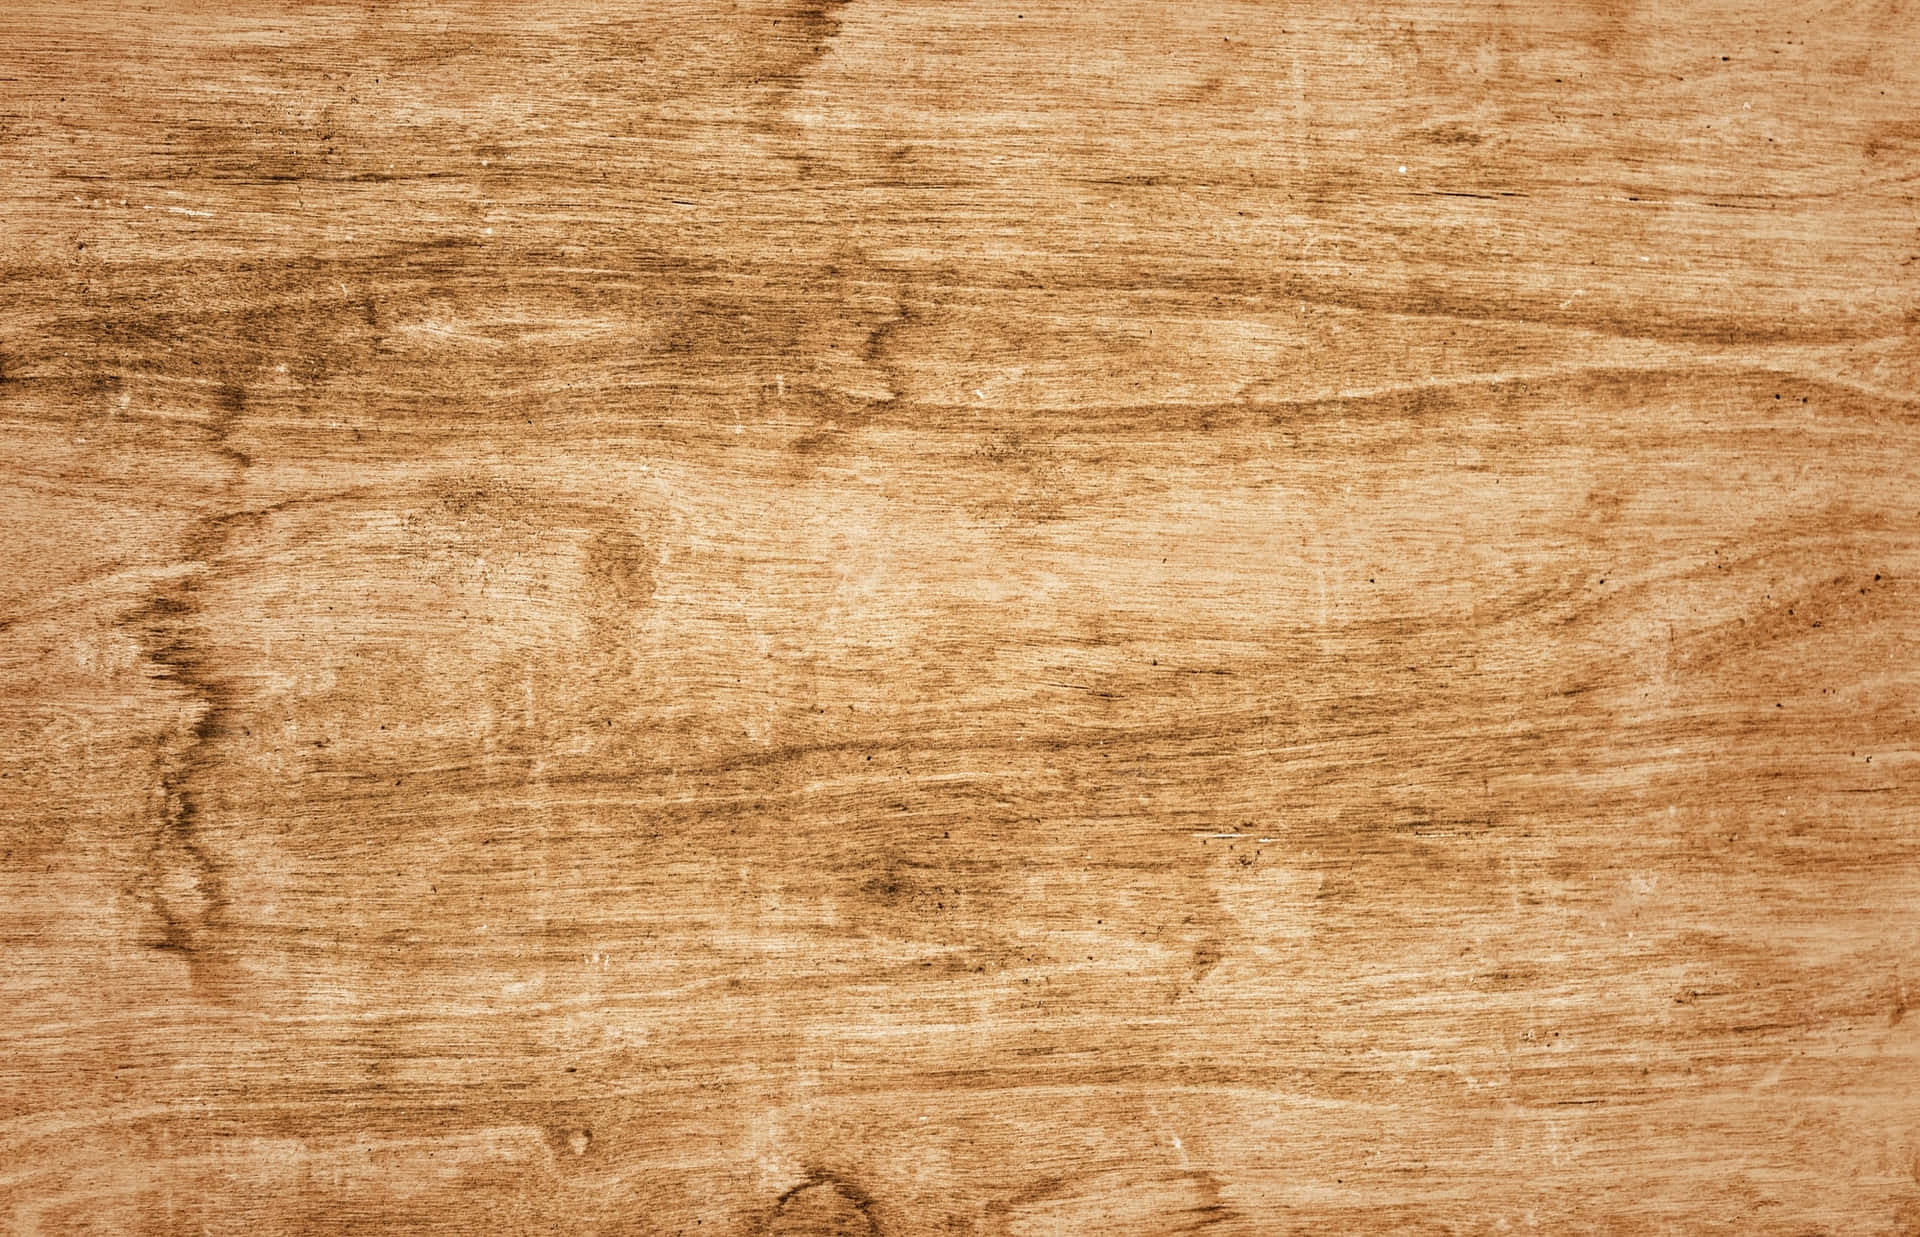 Free Wood Texture Wallpaper Downloads, [200+] Wood Texture Wallpapers for  FREE 